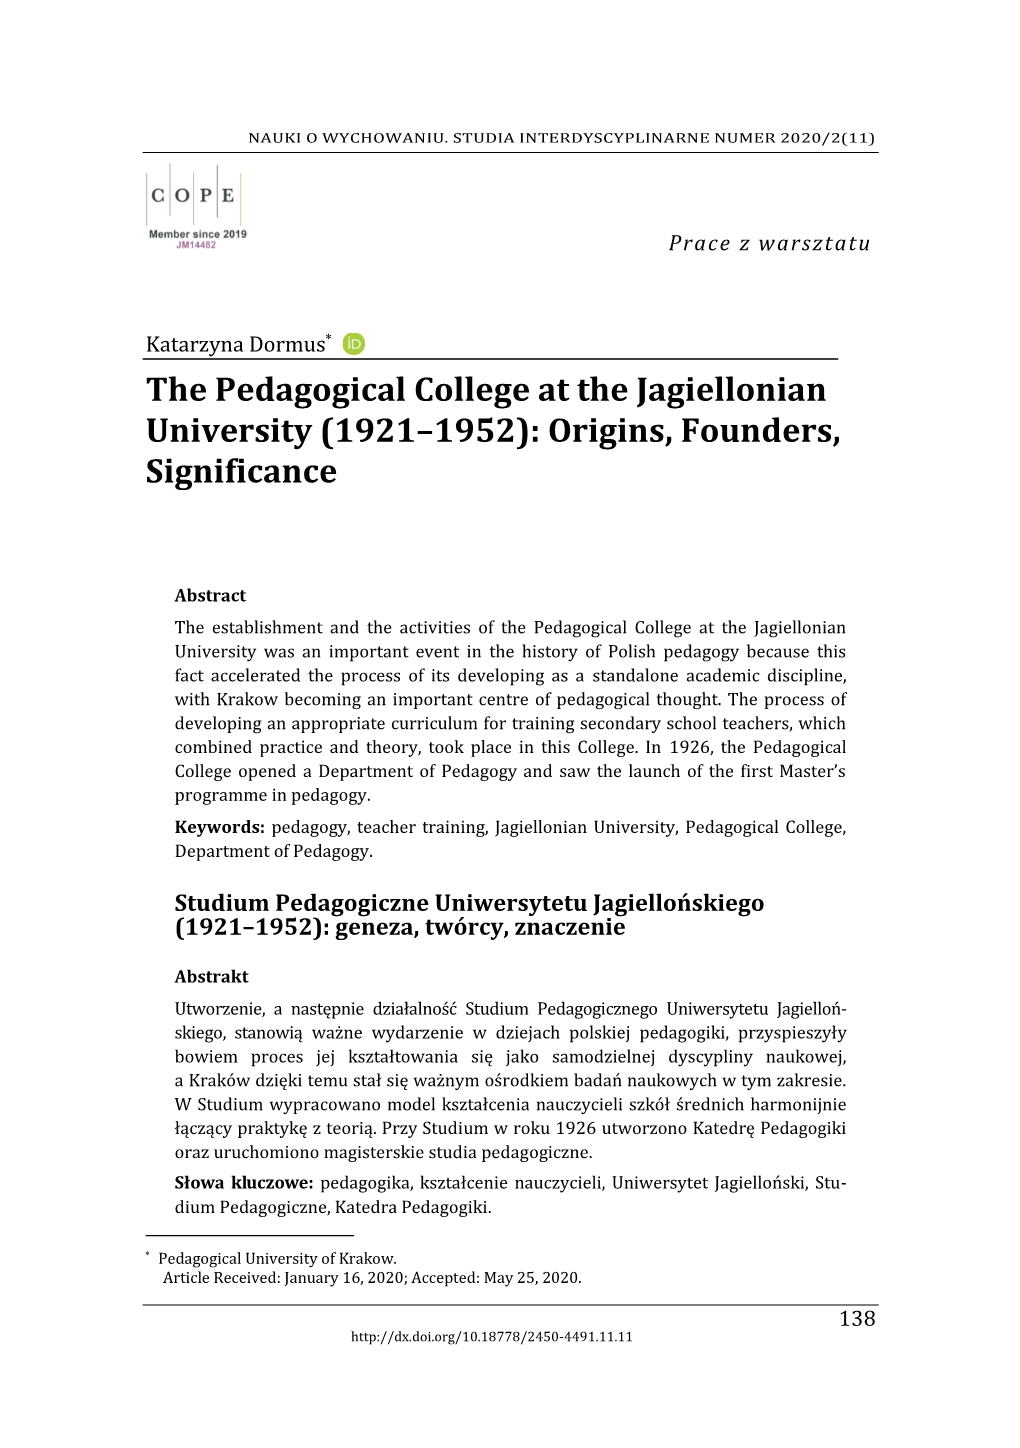 The Pedagogical College at the Jagiellonian University (1921–1952): Origins, Founders, Significance